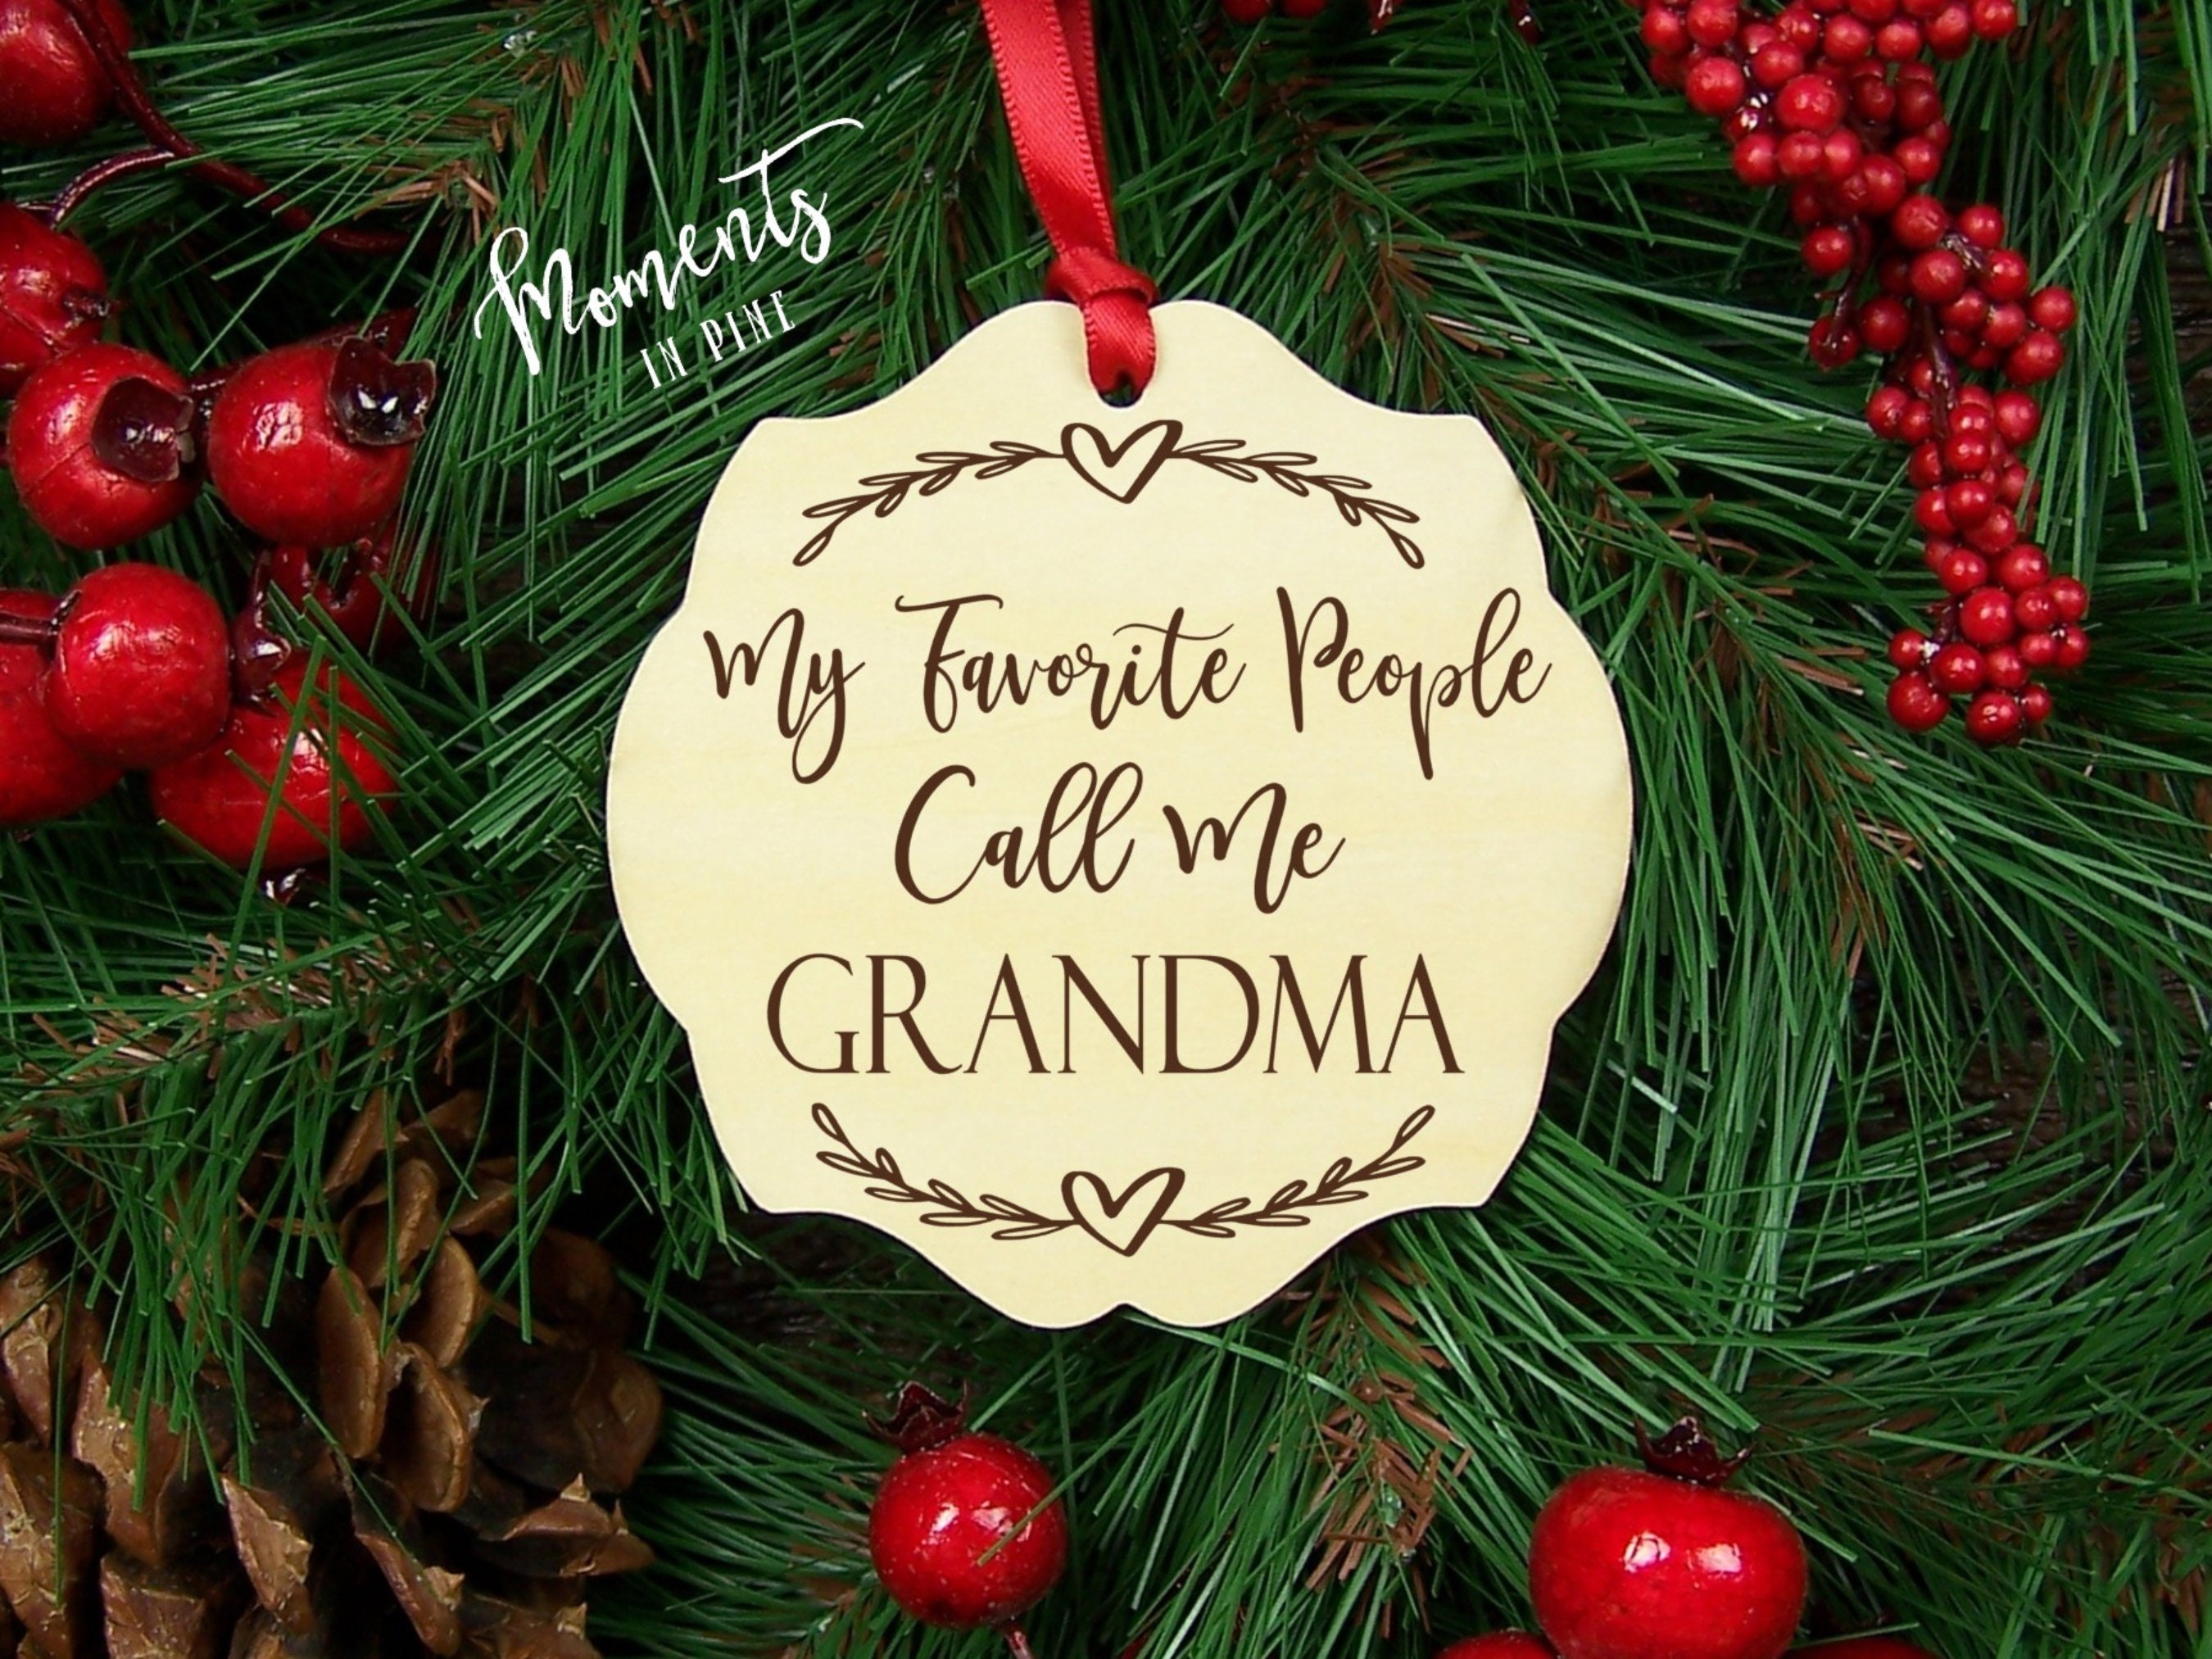 We Take After Our Grandma Personalized Funny Grandkids Ornament, Christmas  Gift For Grandma - teejeep